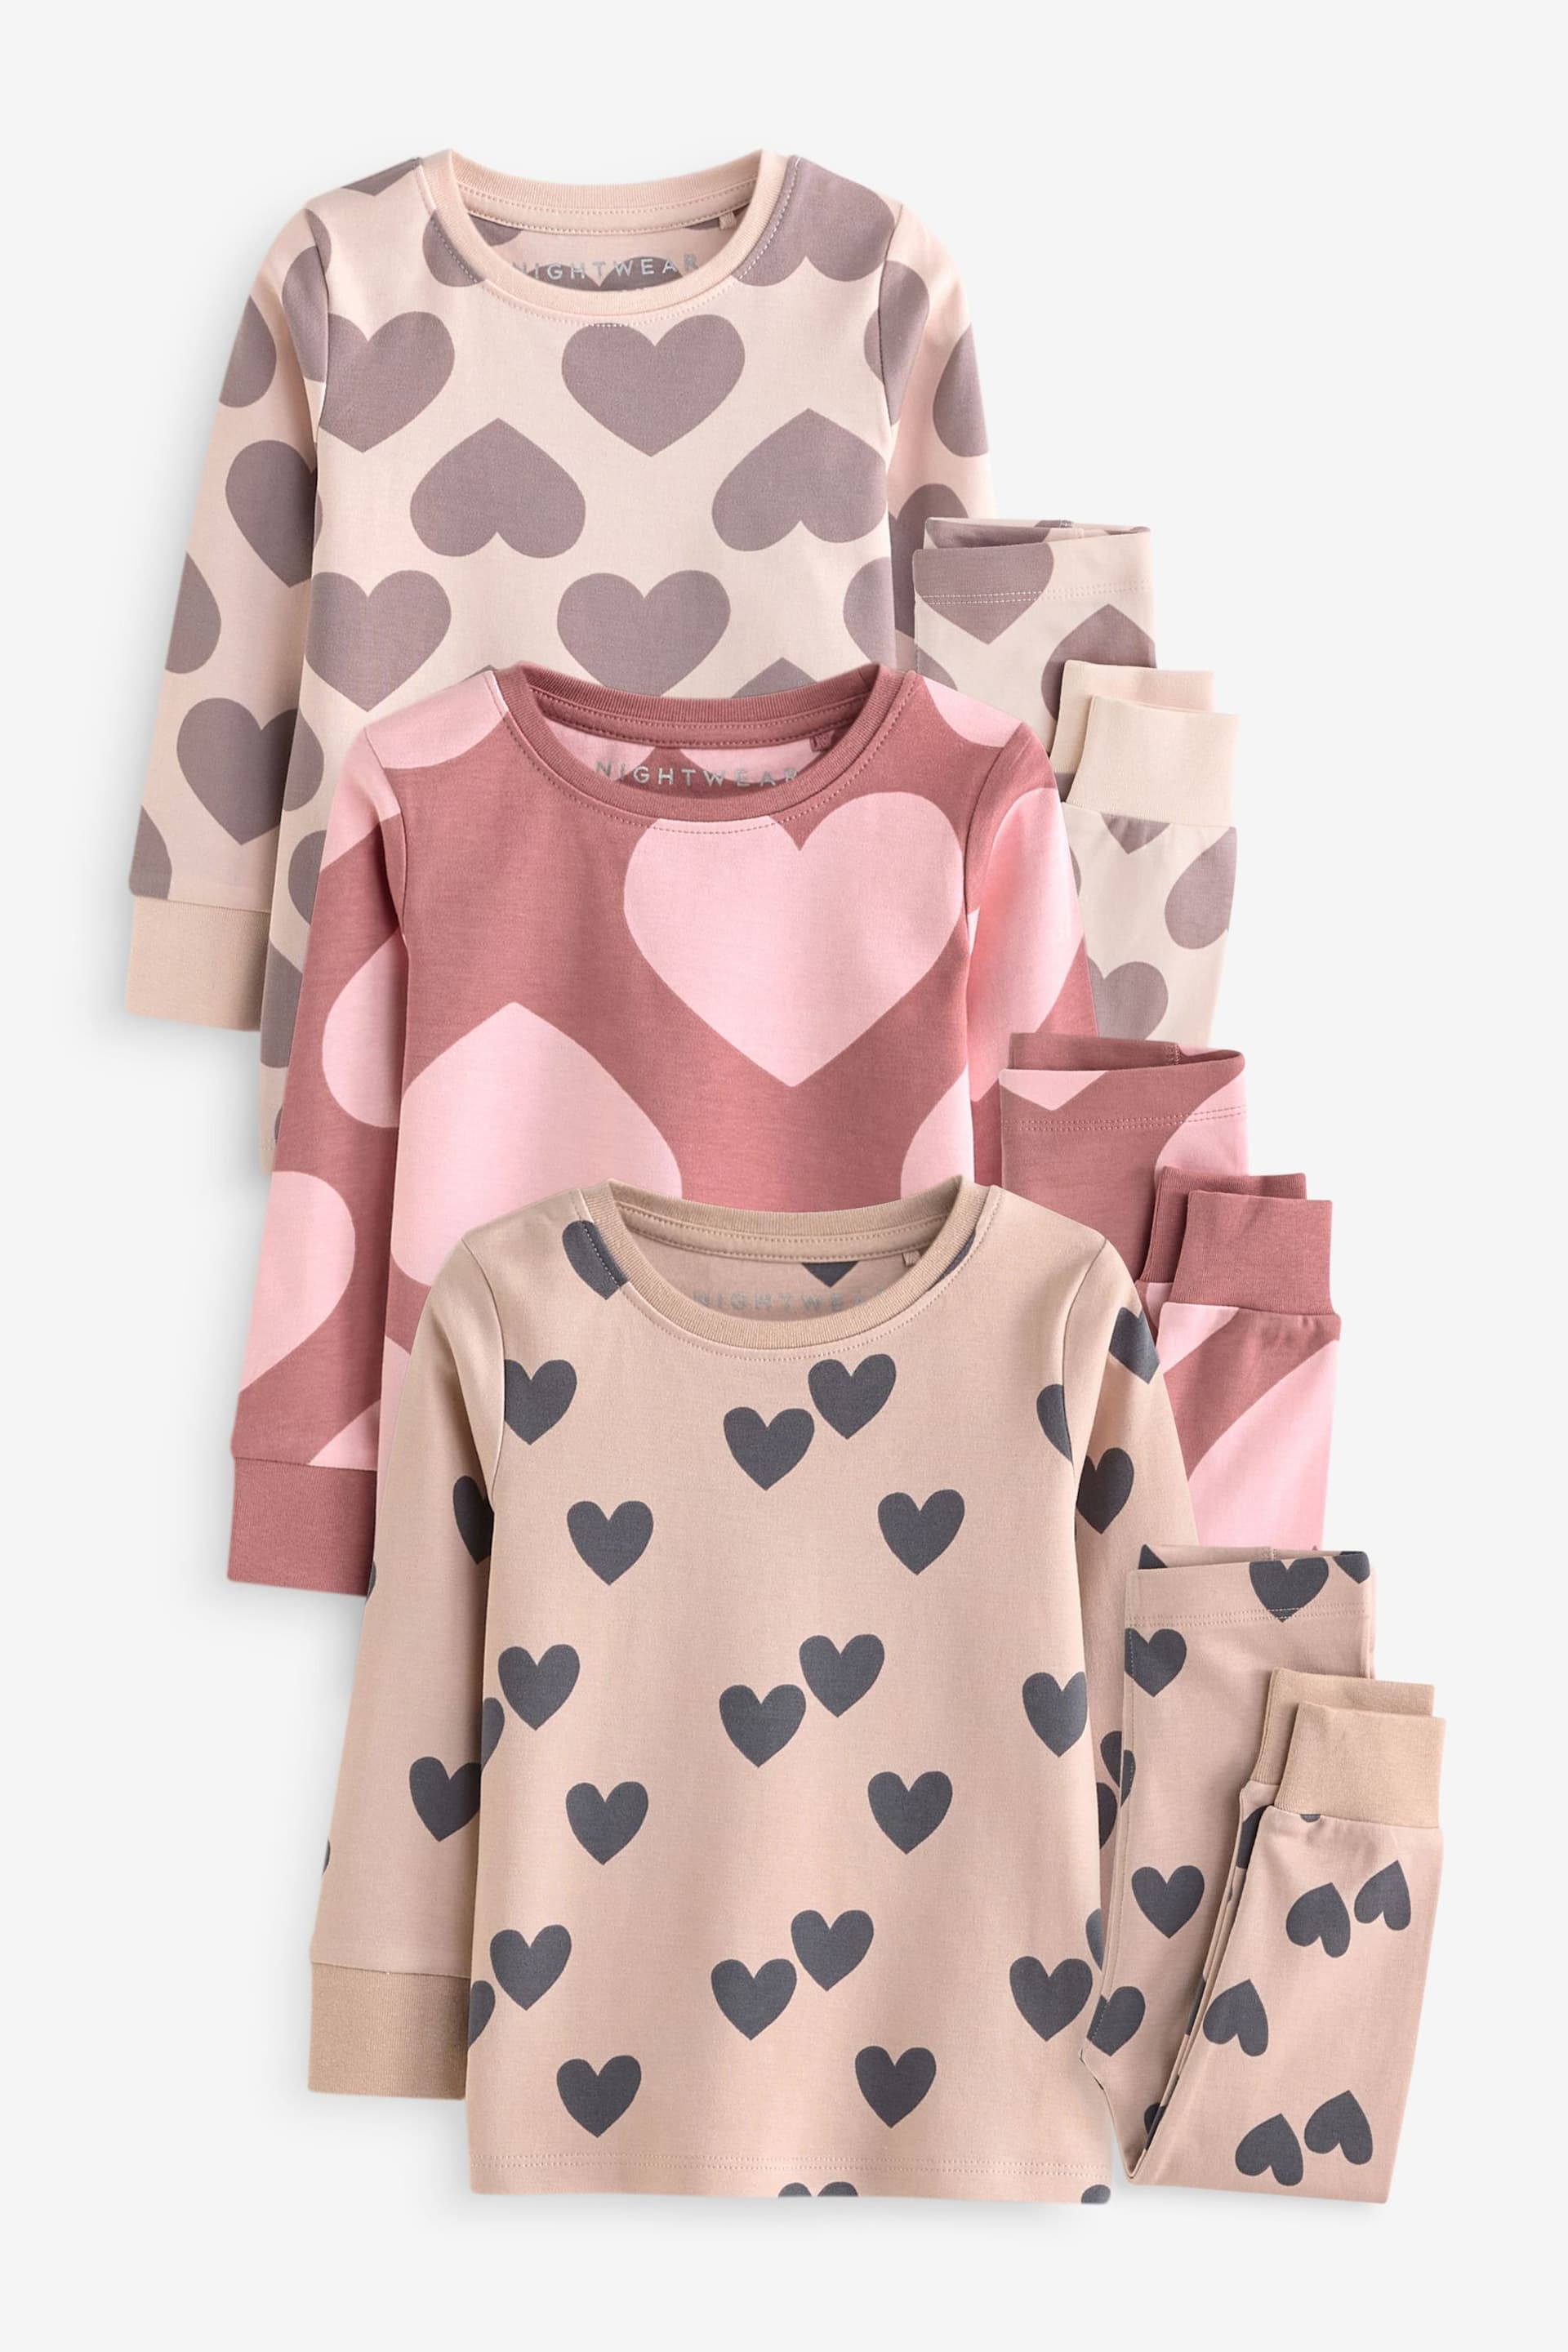 Neutral/ Pink Heart Stampy Pyjamas 3 Pack (9mths-16yrs) - Image 5 of 13